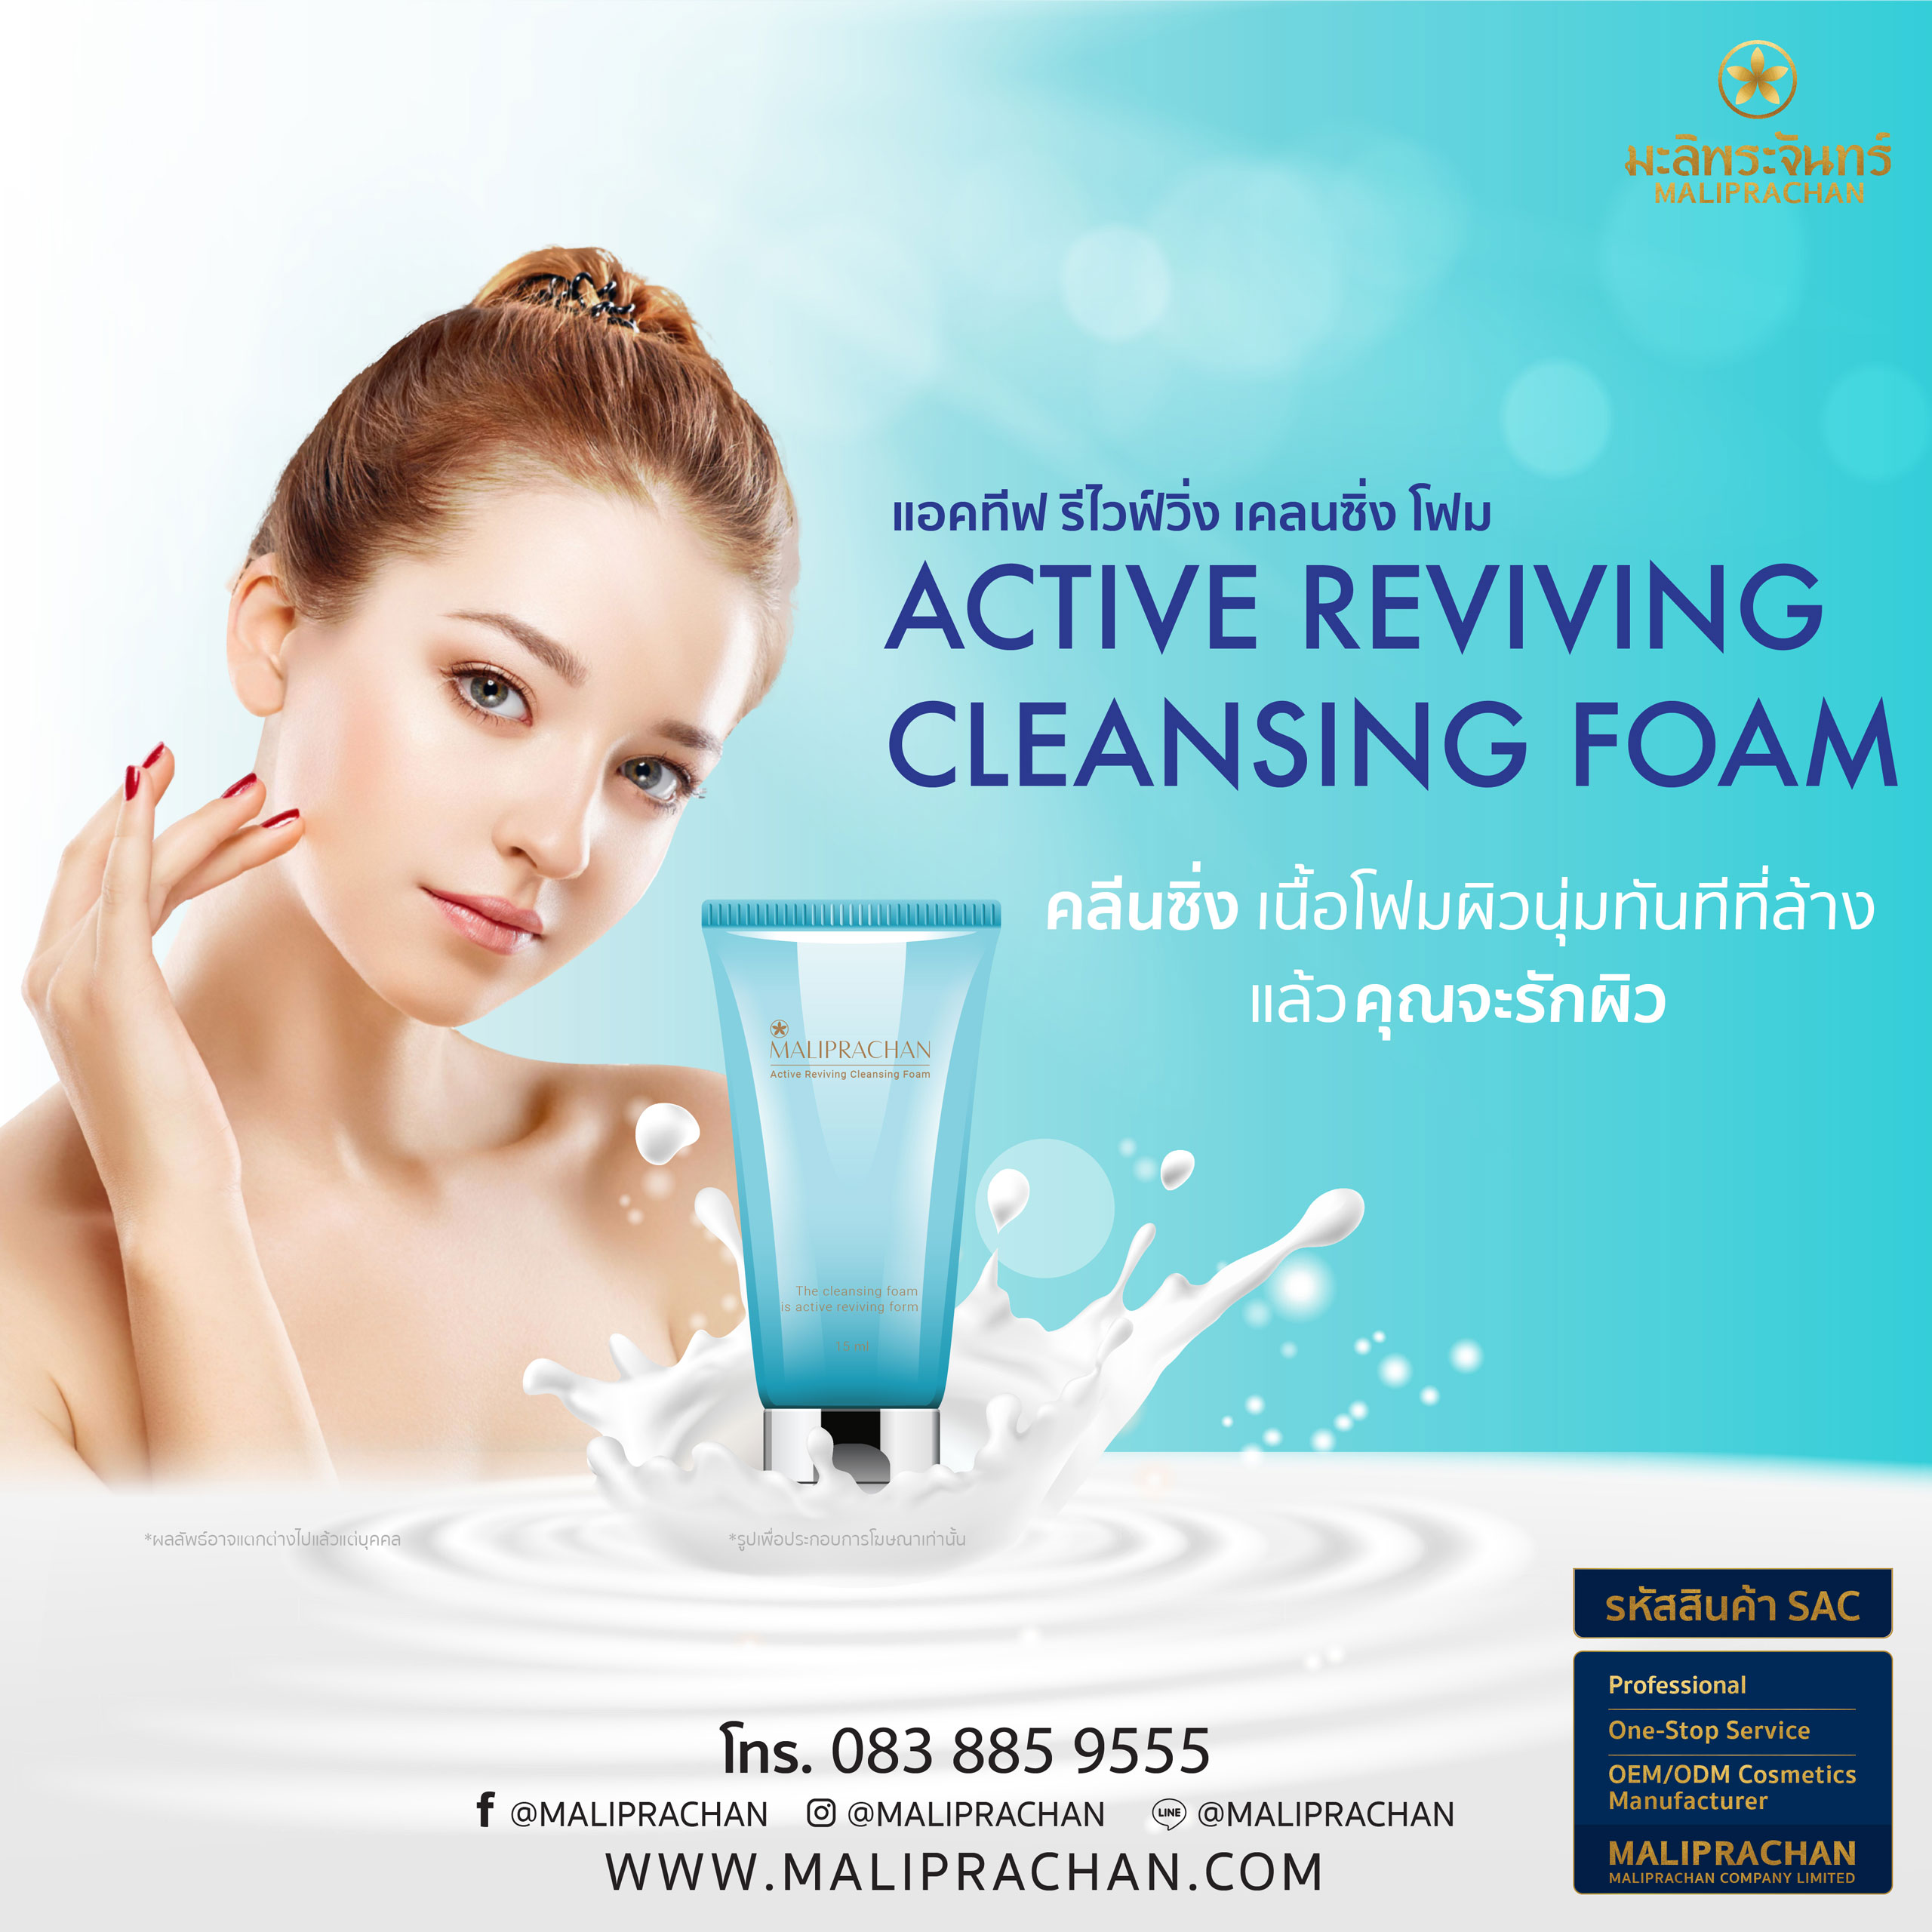 Active Reviving Cleansing Foam